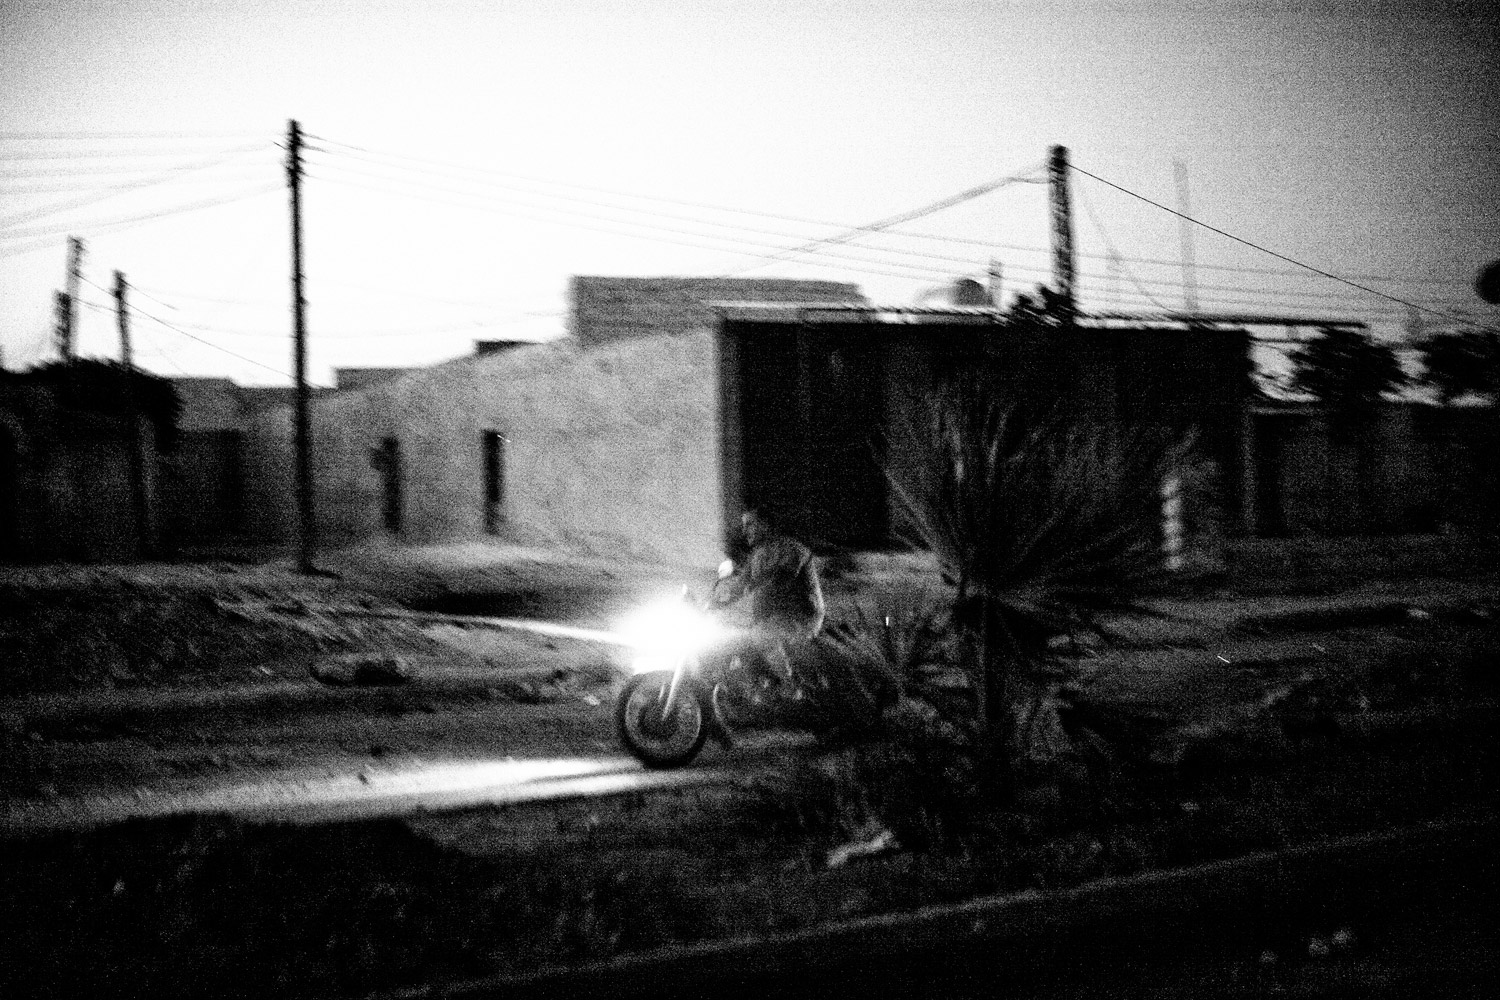 A man rides a motorcycle in Hama, July 17, 2011.